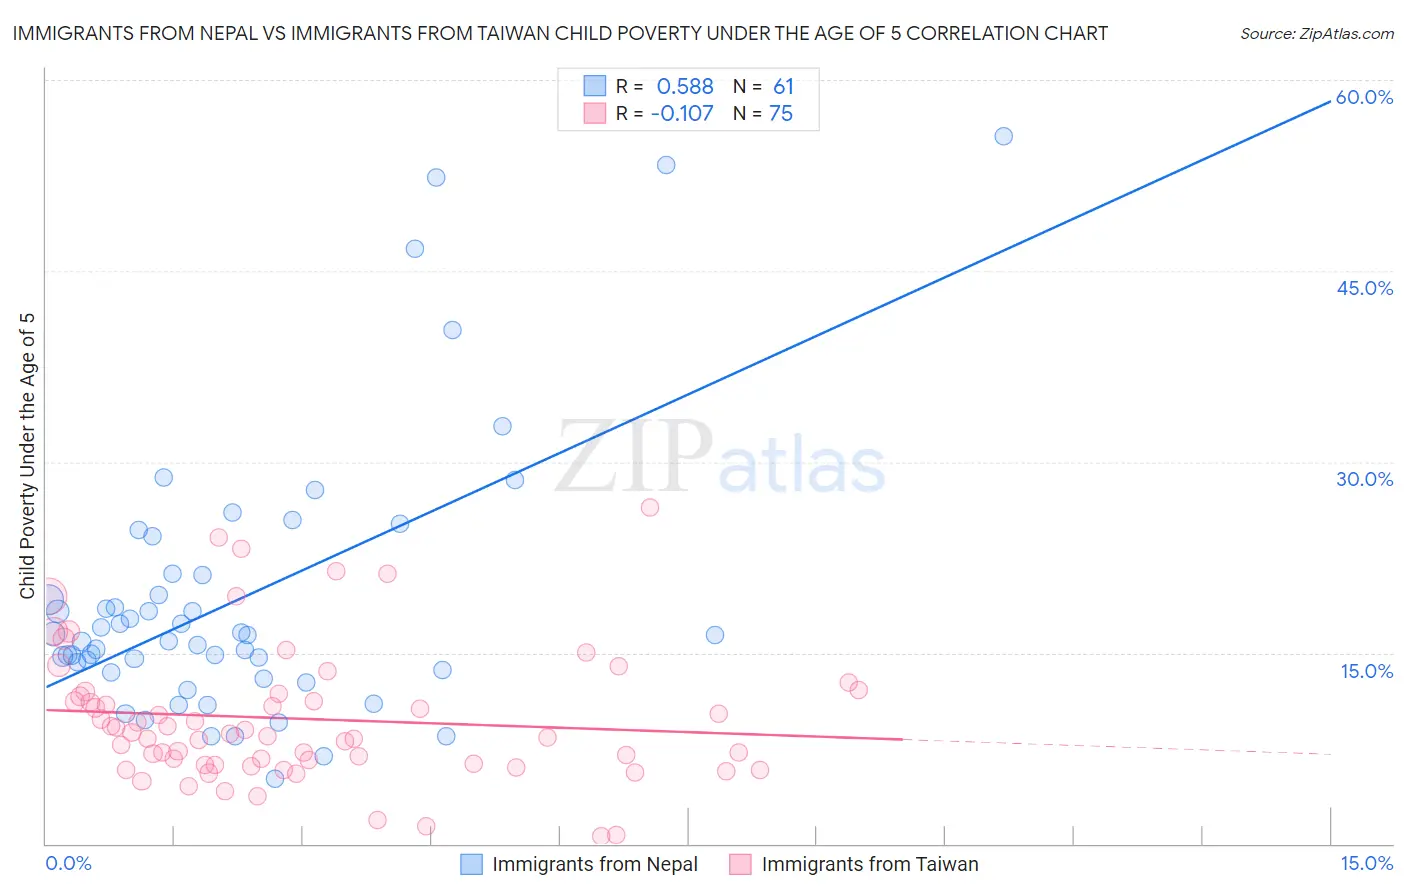 Immigrants from Nepal vs Immigrants from Taiwan Child Poverty Under the Age of 5